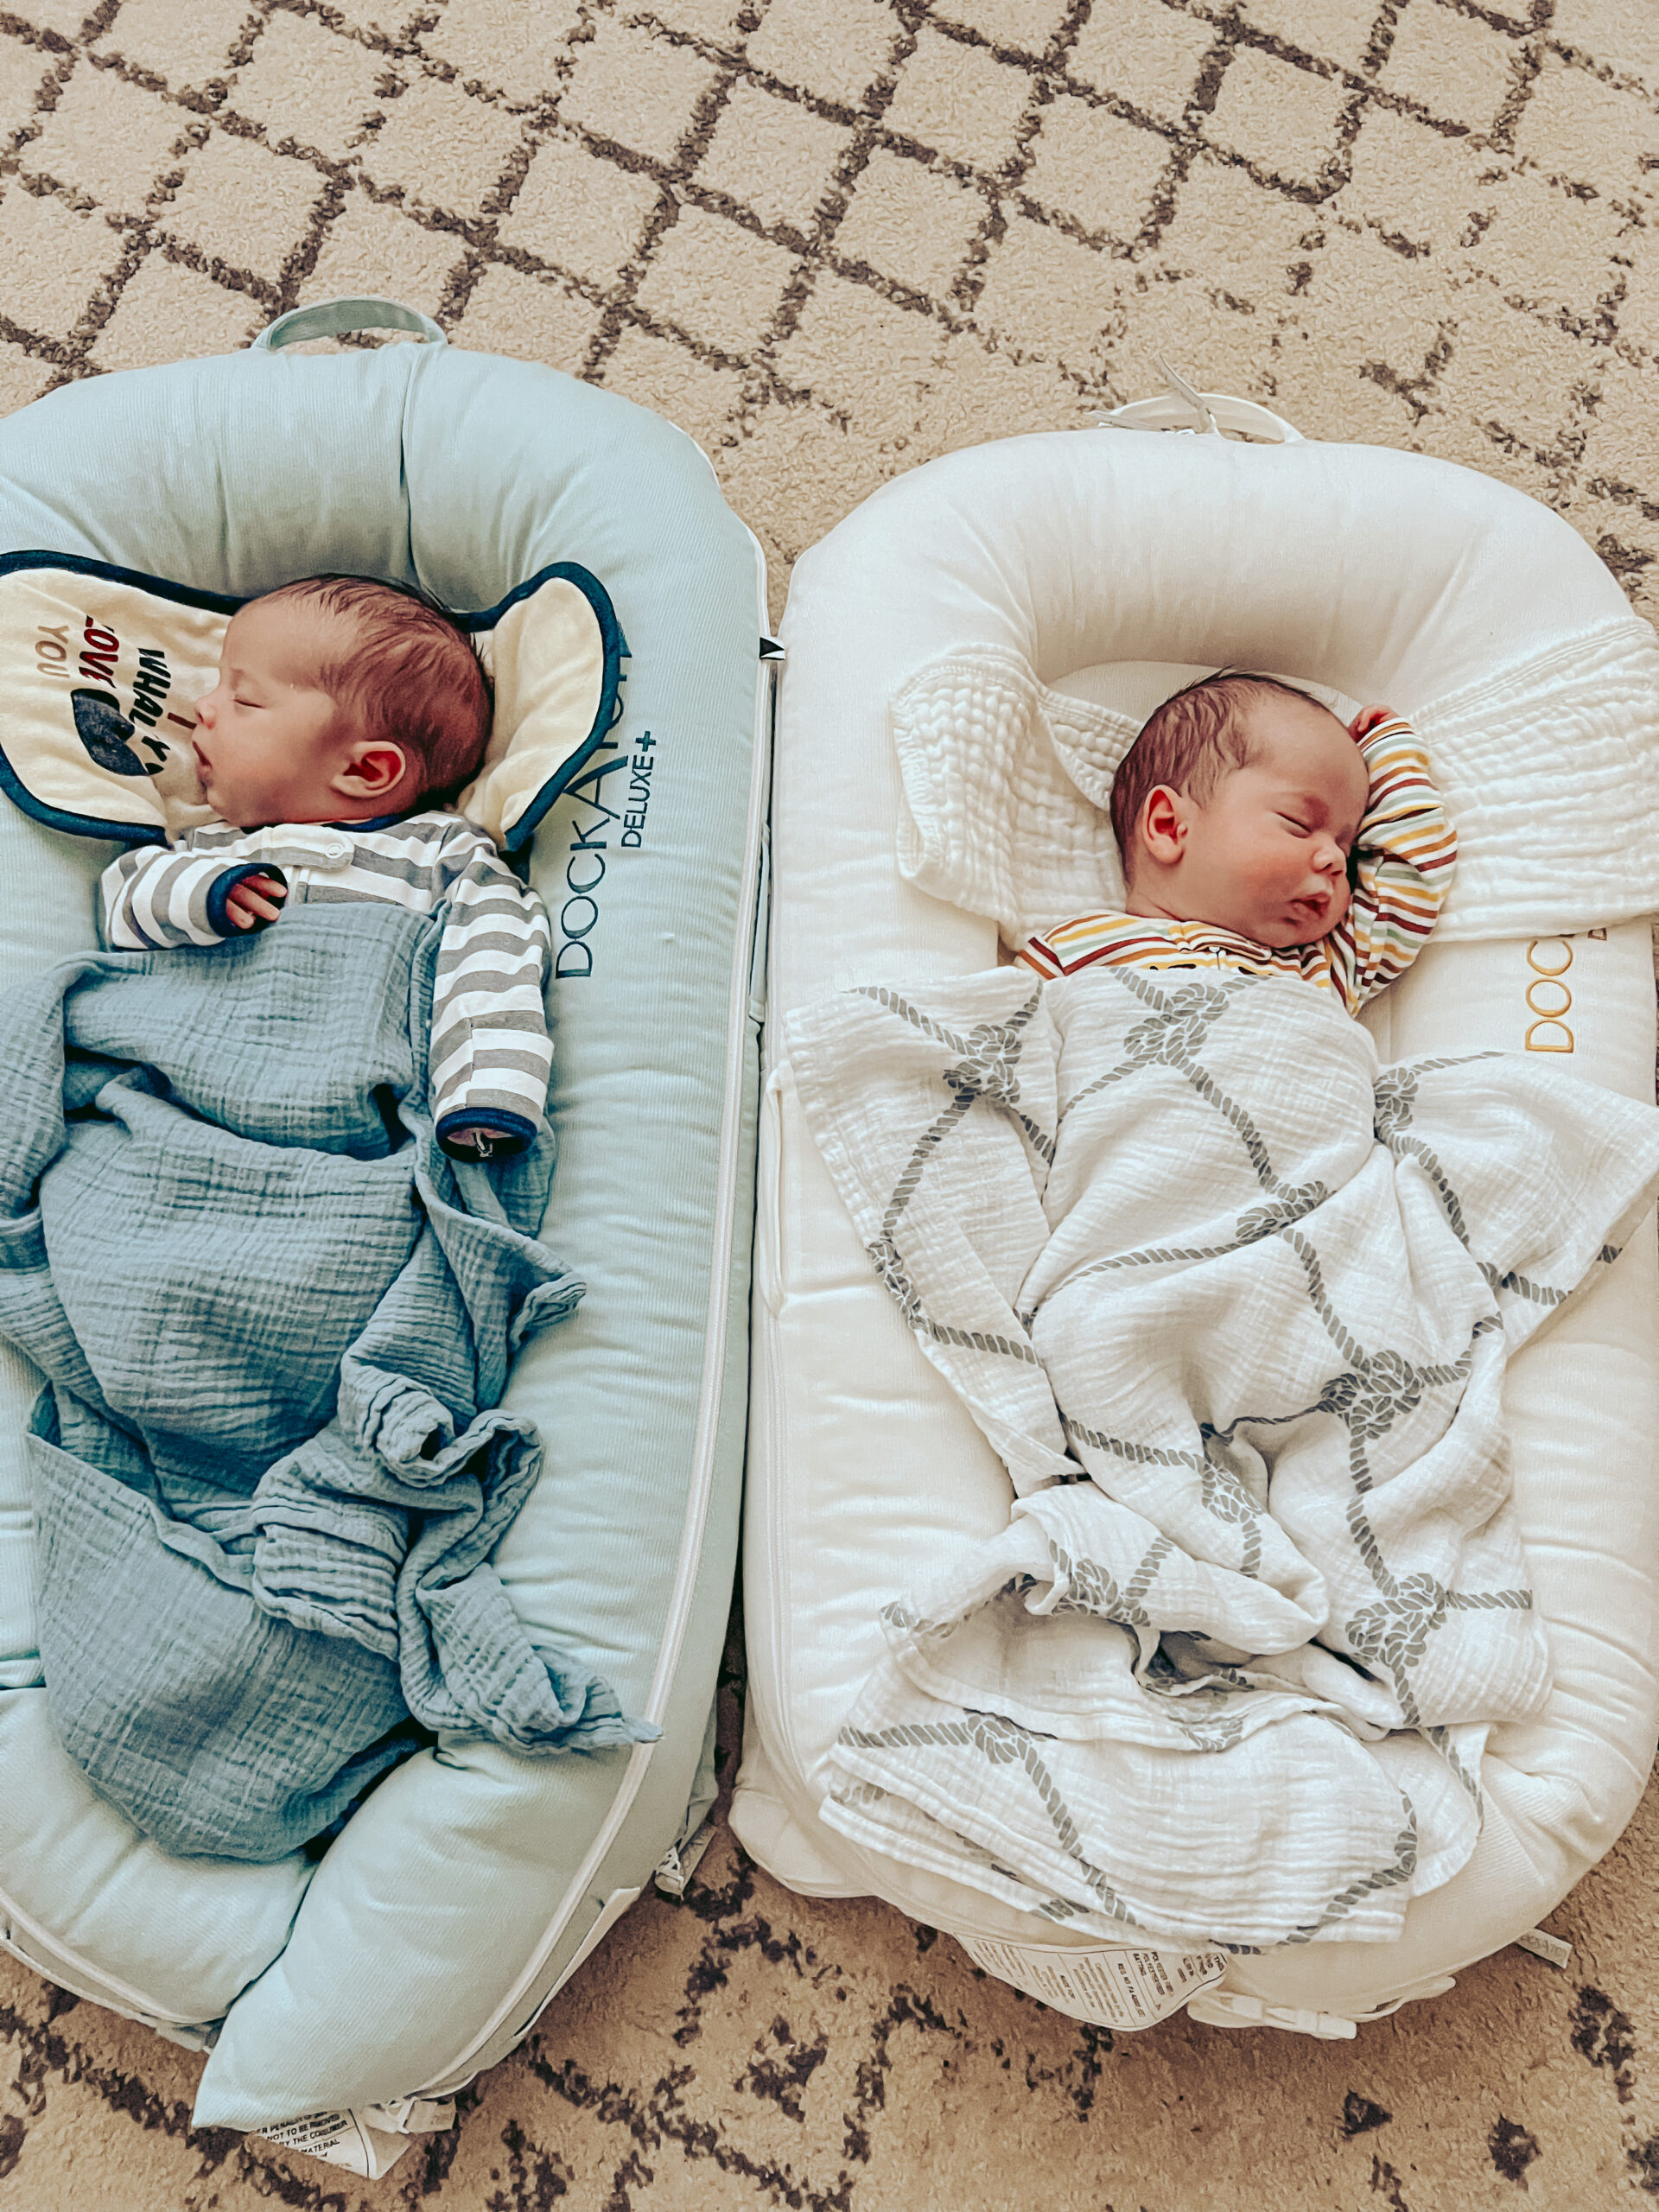 Our Twins Have Arrived!